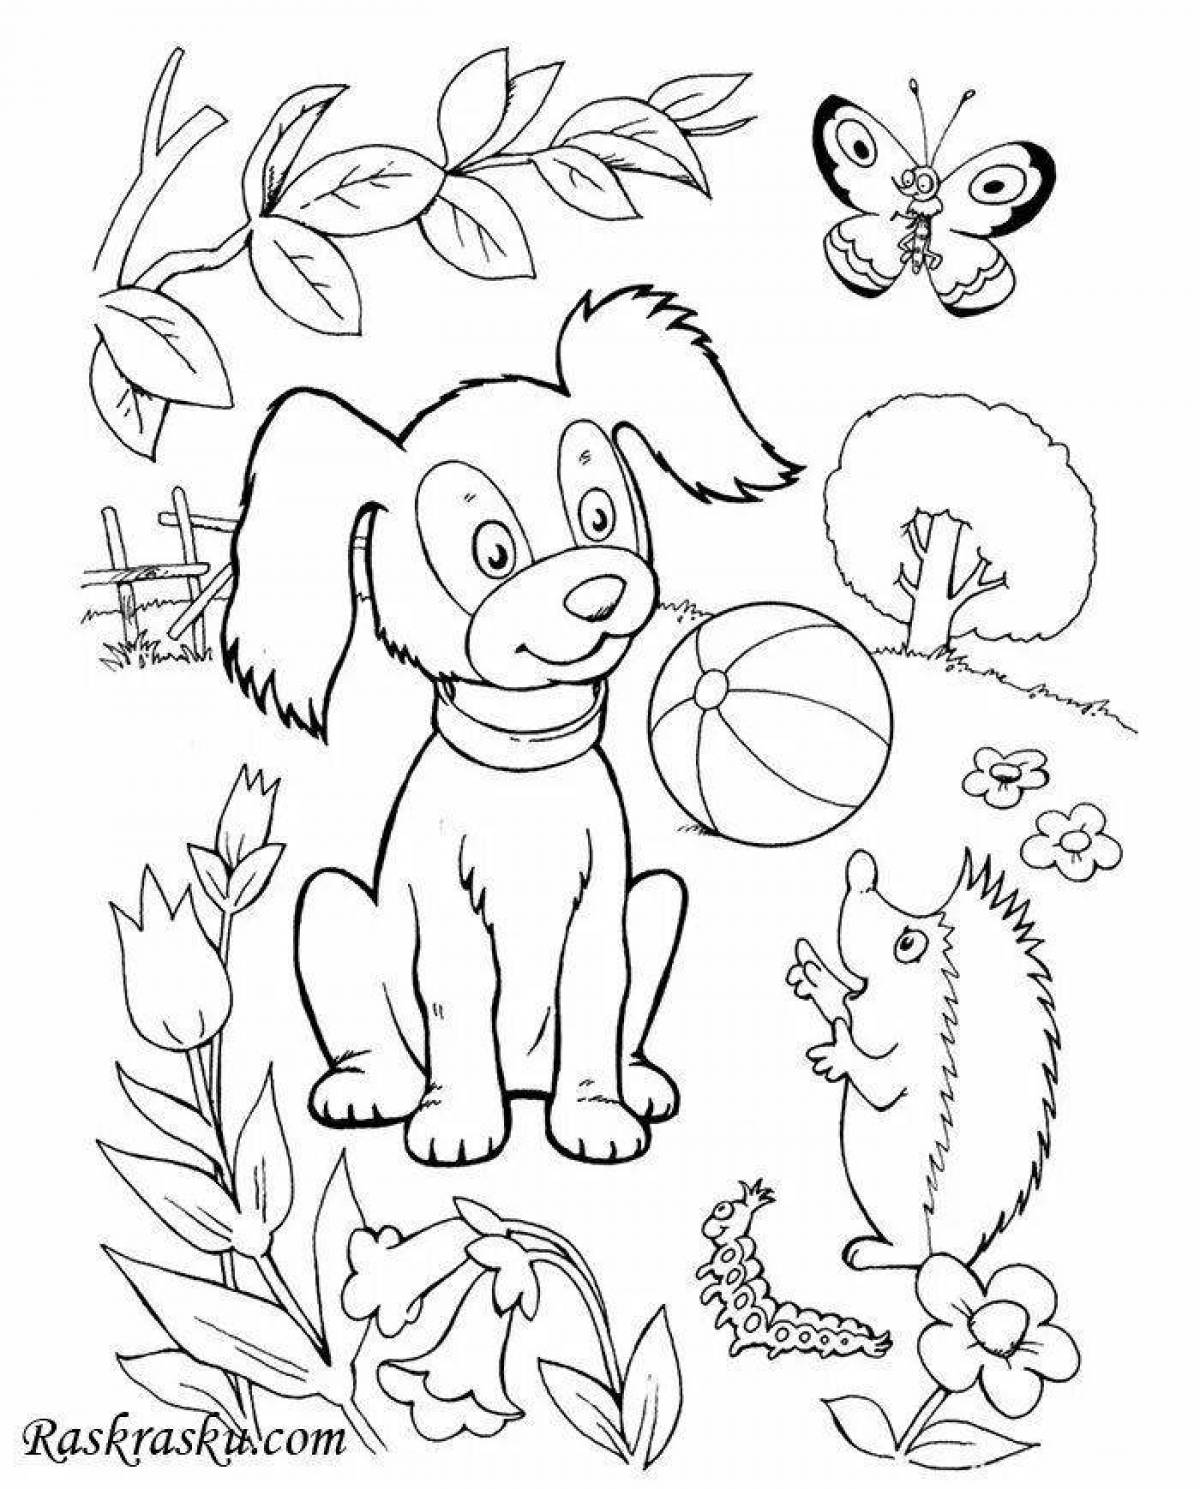 Handy animal coloring page for kids